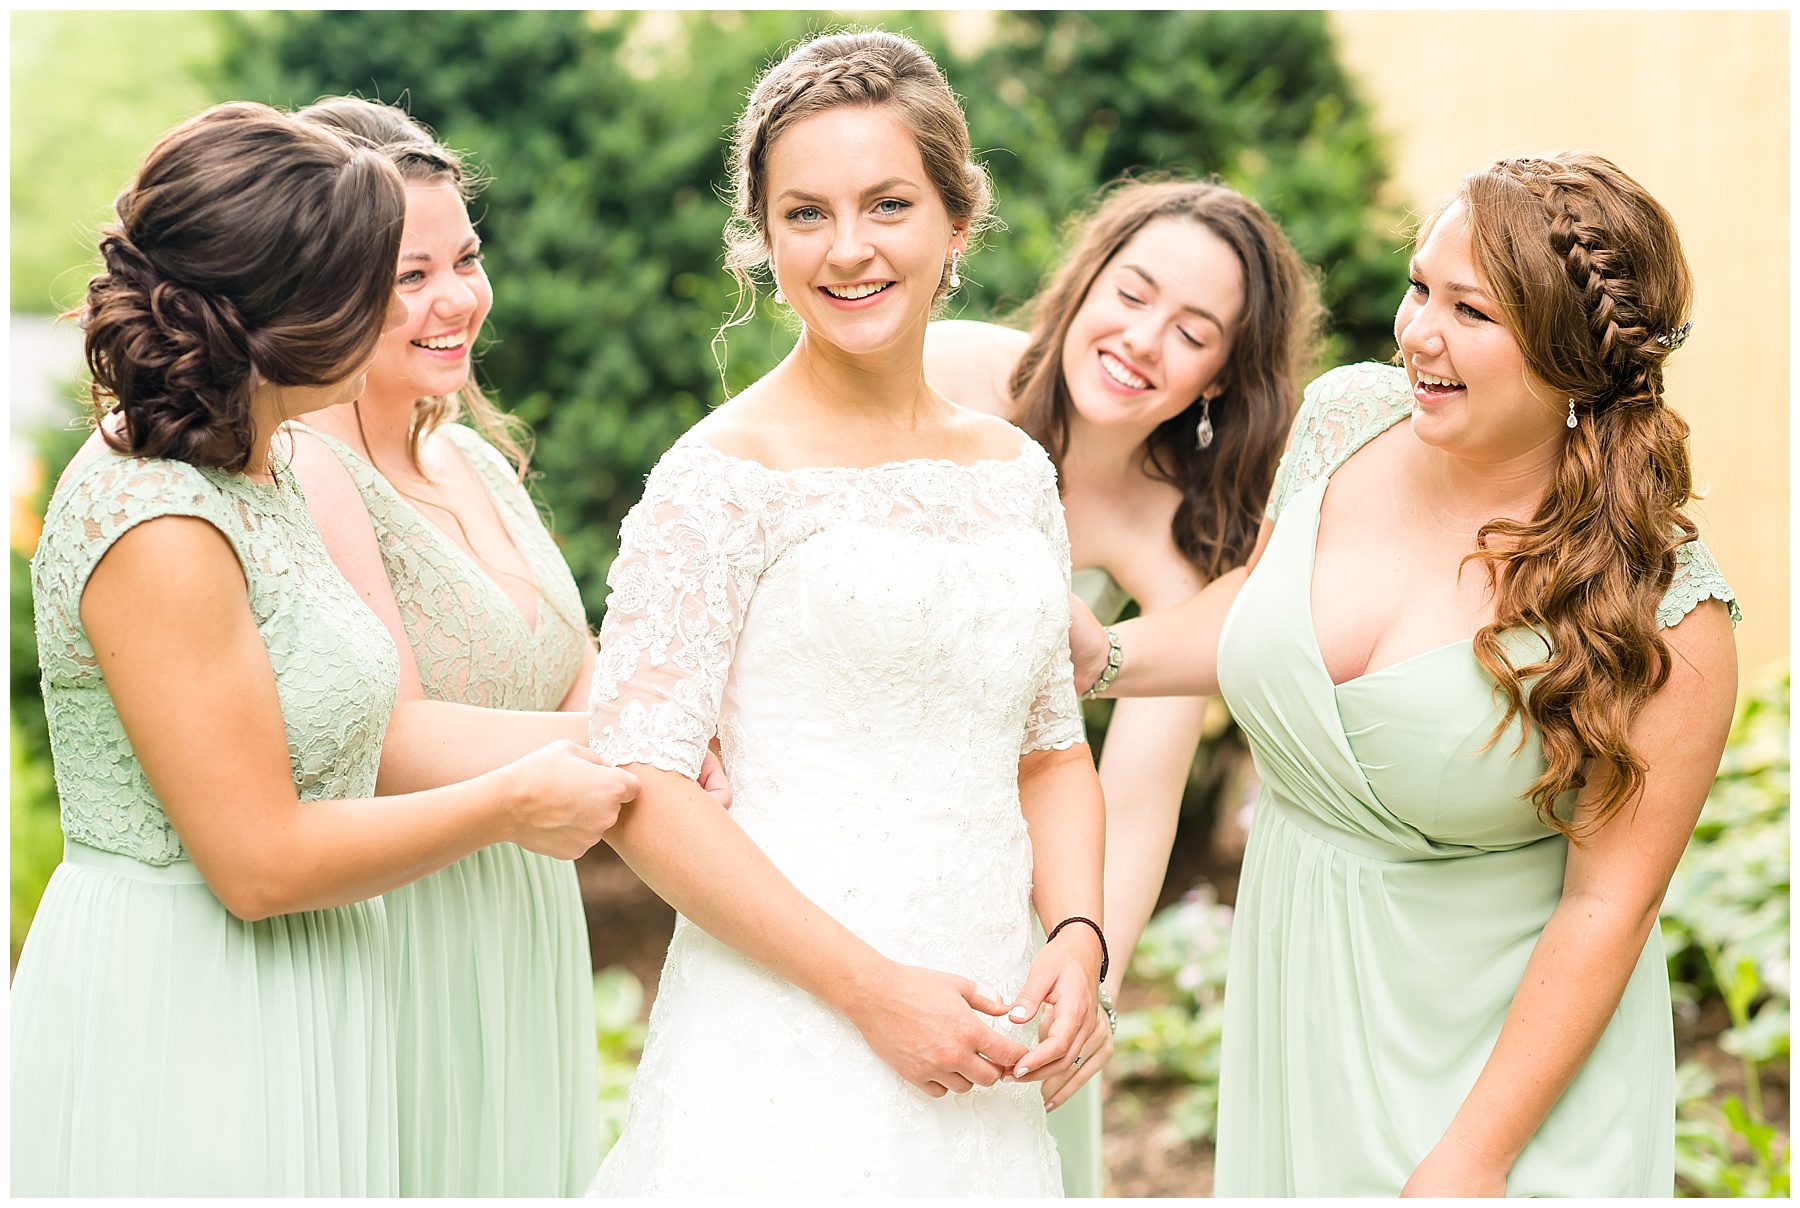 Bride being fluffed by bridesmaids in 2018 wedding photography favorites